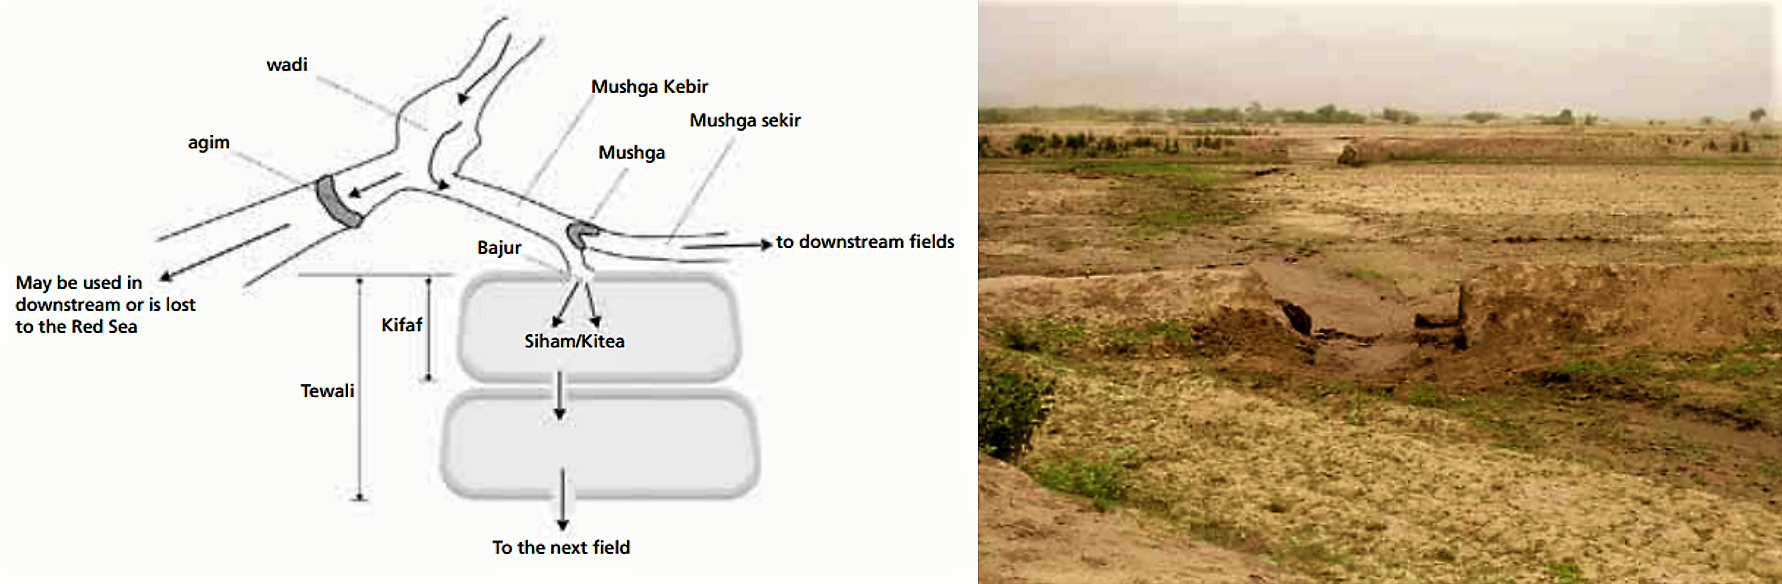 A field-to-field distribution in Eritrea. The picture on the right side shows cuts on the bunds to irrigate the next field. Source: FAO (2010)       